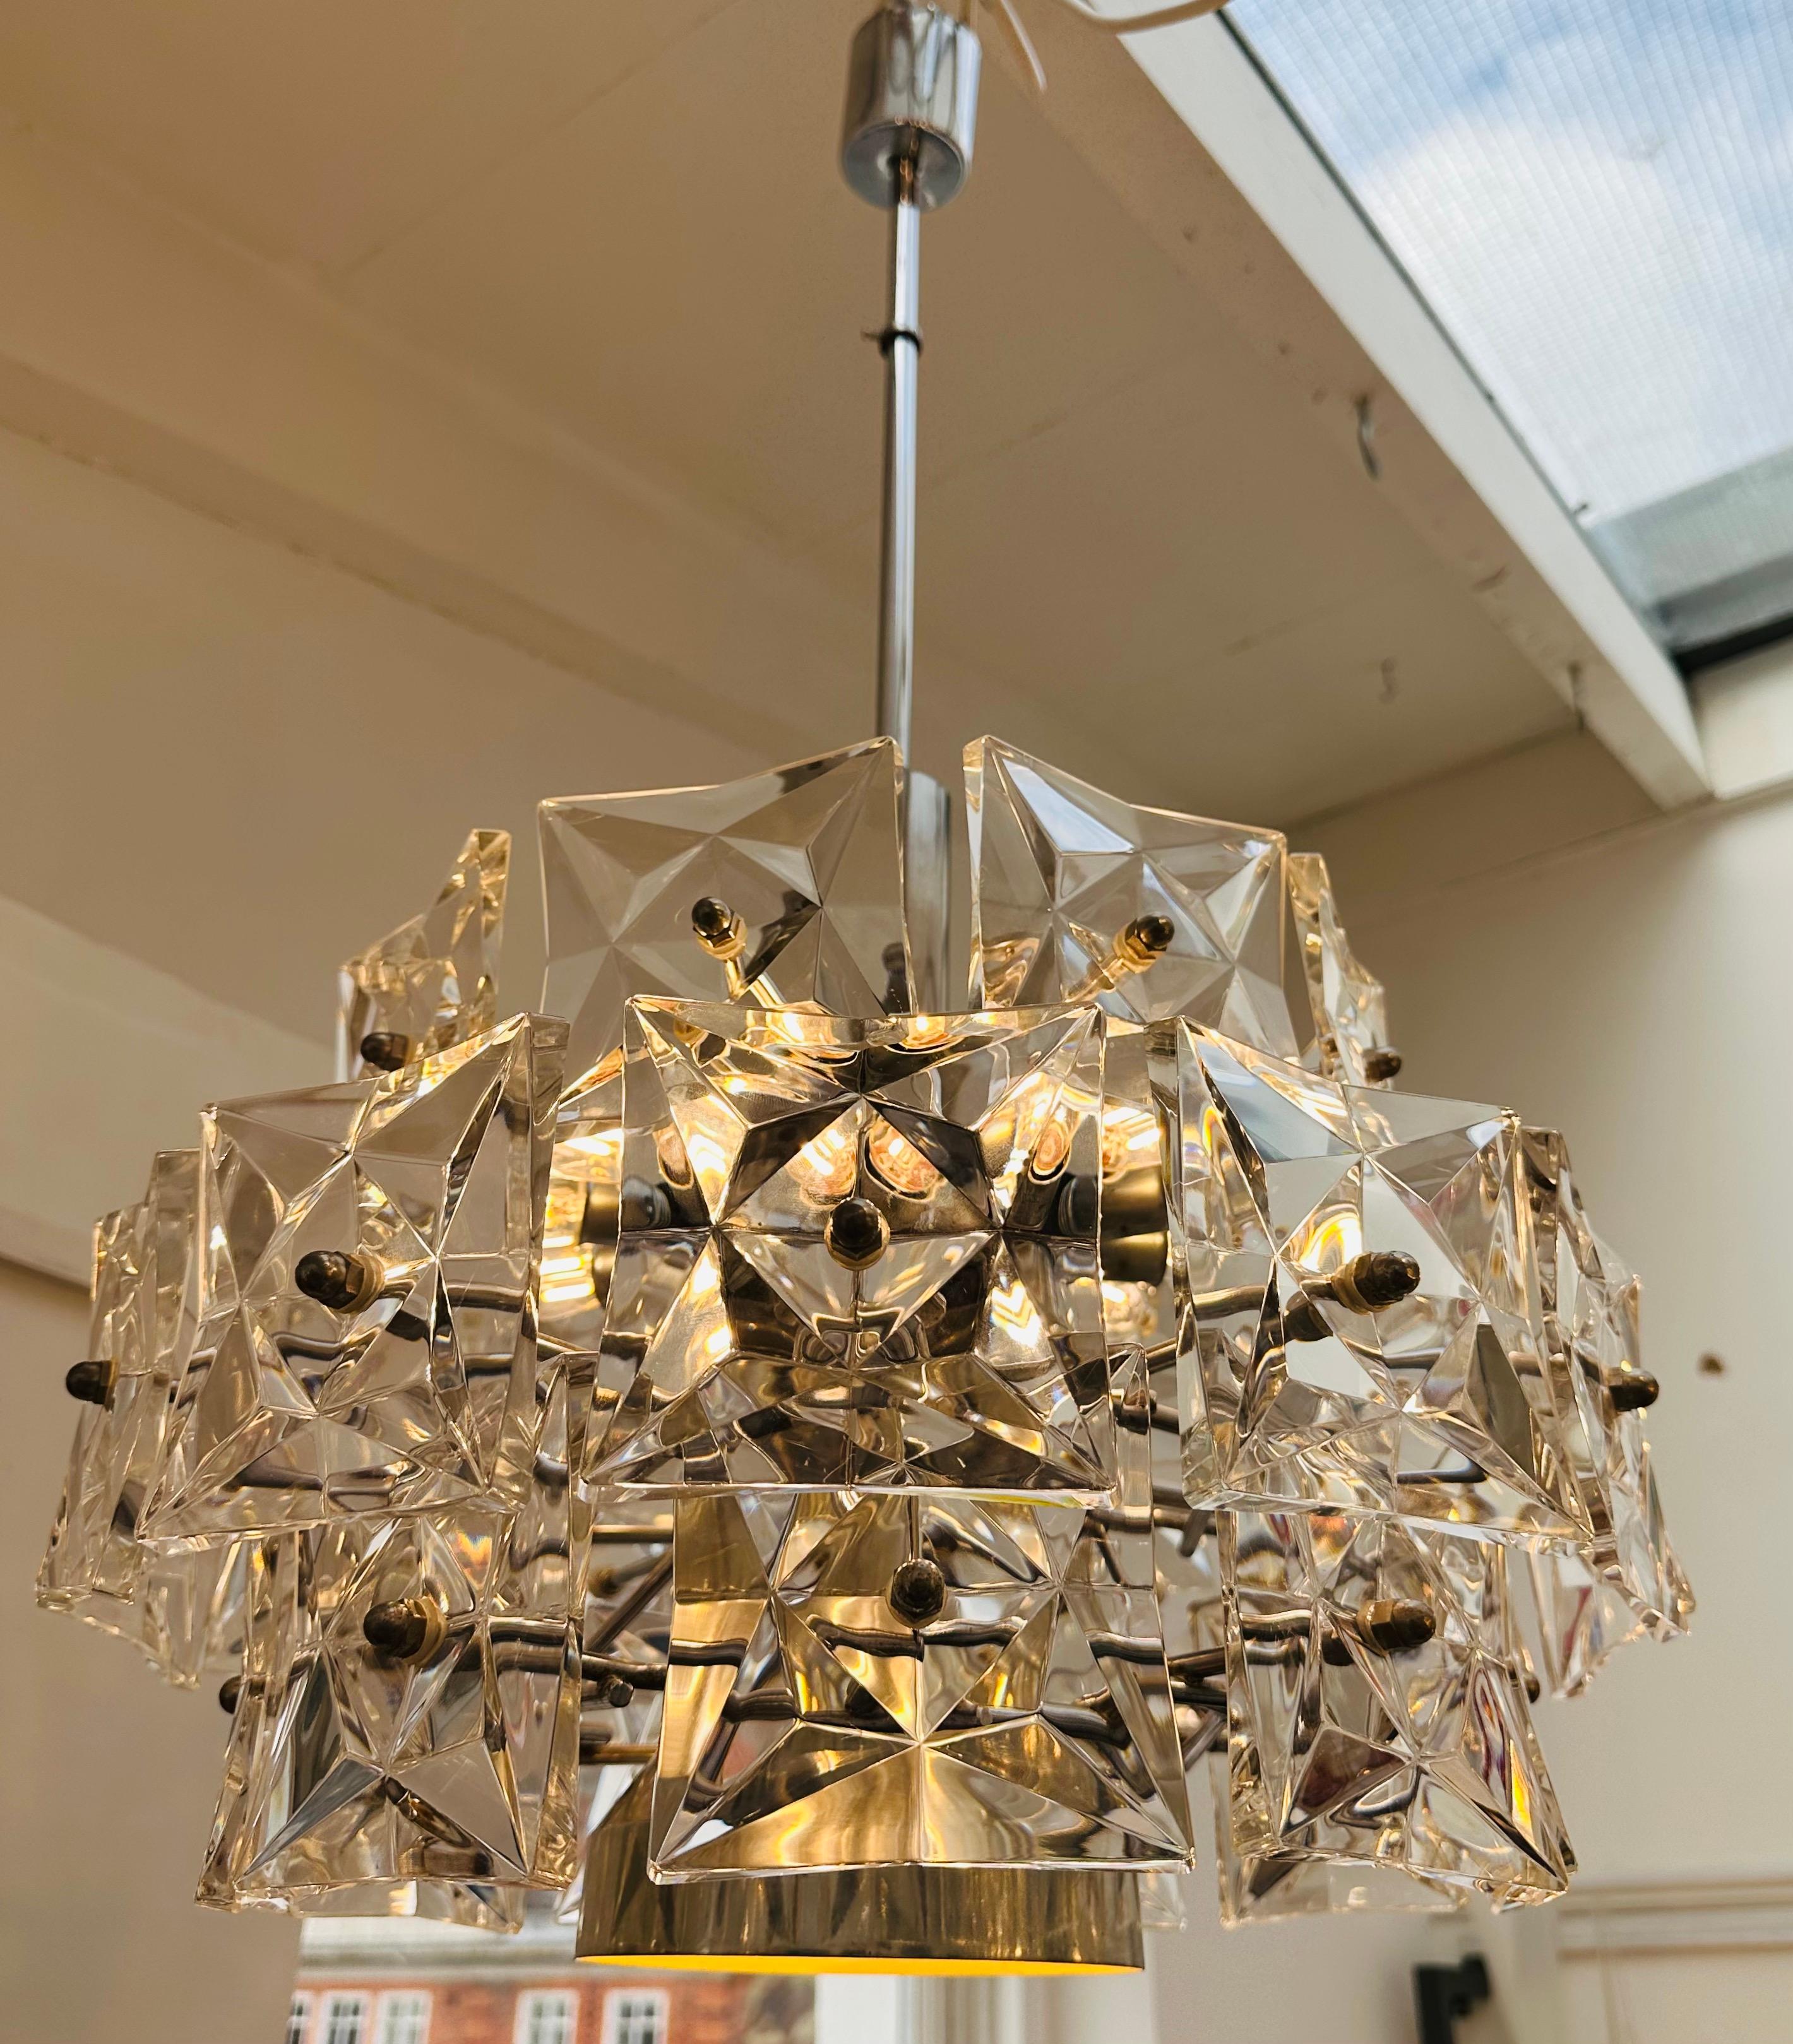 A striking 1960s three-tiered crystal chandelier manufactured by Kinkeldey in Germany. The chandelier is composed of 30 faceted square crystal prisms suspended from a chrome stem and canopy. Each glass prism is secured onto the frame with a feature